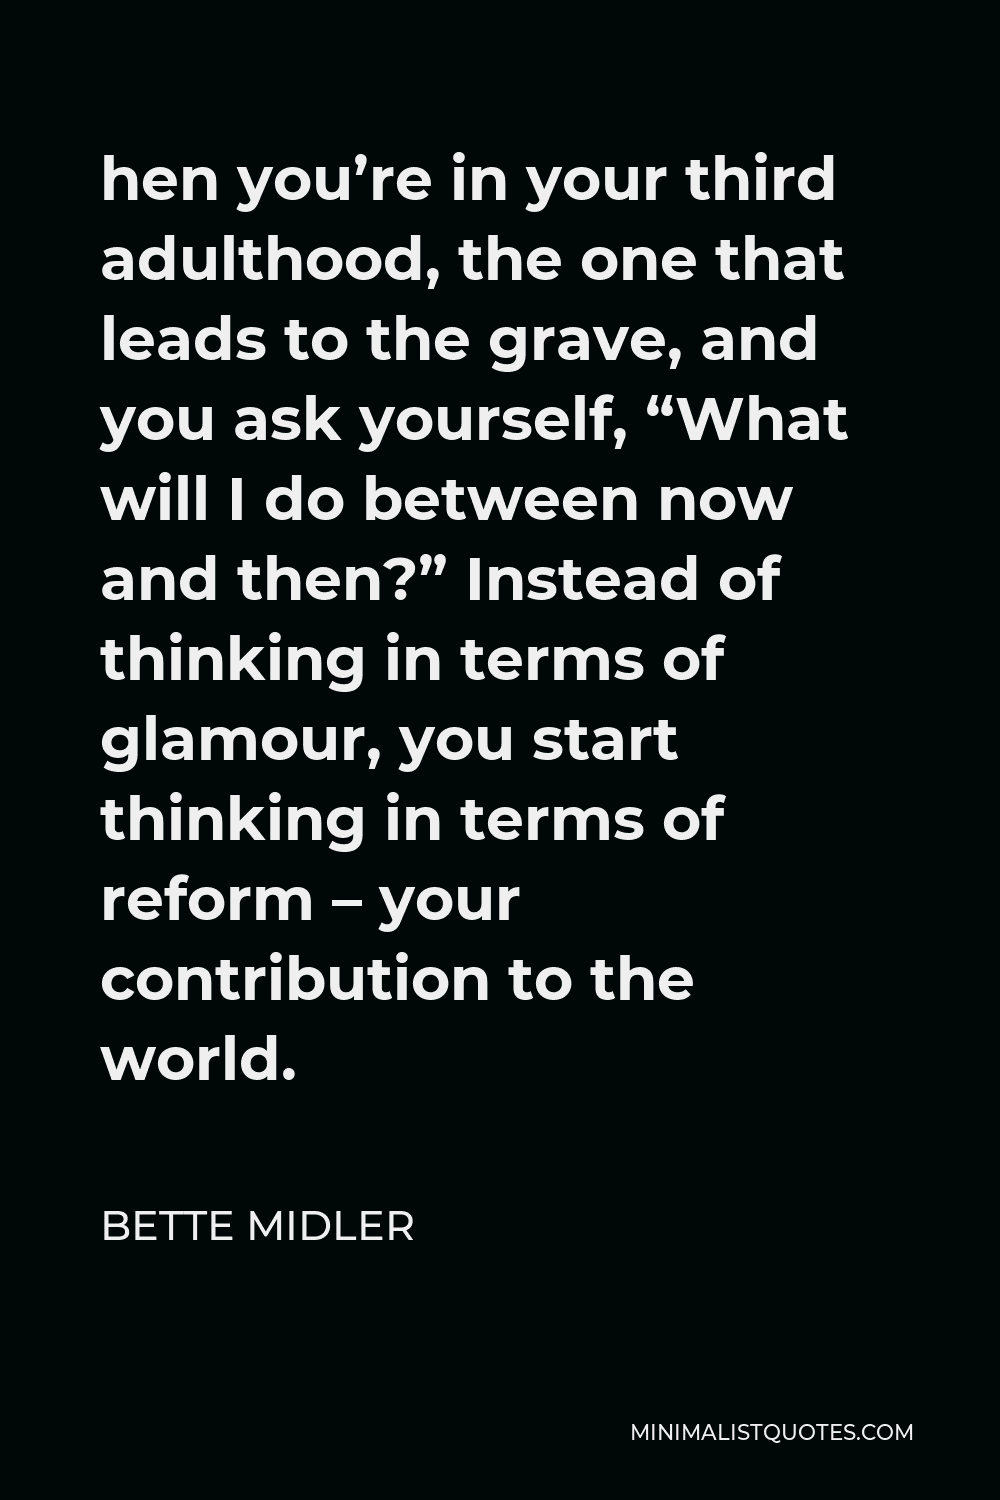 Bette Midler Quote - hen you’re in your third adulthood, the one that leads to the grave, and you ask yourself, “What will I do between now and then?” Instead of thinking in terms of glamour, you start thinking in terms of reform – your contribution to the world.